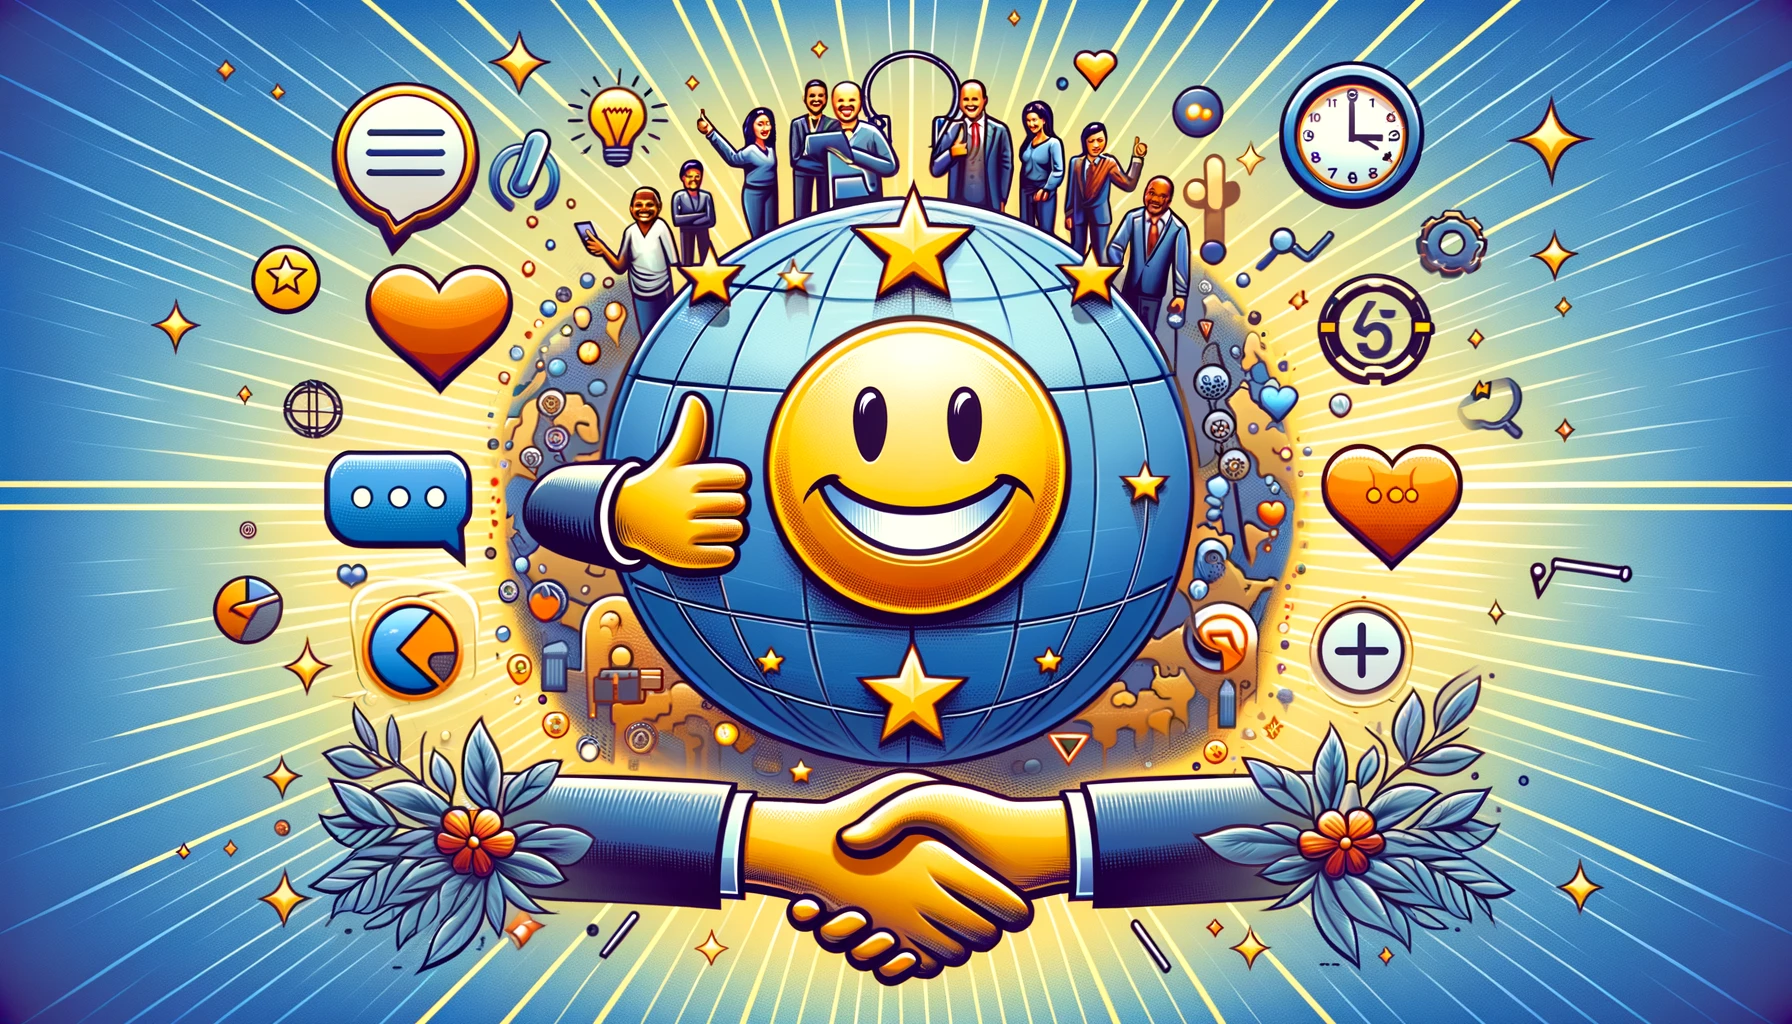 A wide image showcasing customer satisfaction in relation to Business Process Automation and Efficiency Tools, featuring a central smiling face with a thumbs up, surrounded by symbols like a heart, chat bubble, clock, five-star rating, handshake, and a globe, against a soft background, illustrating the global impact of excellent customer service.